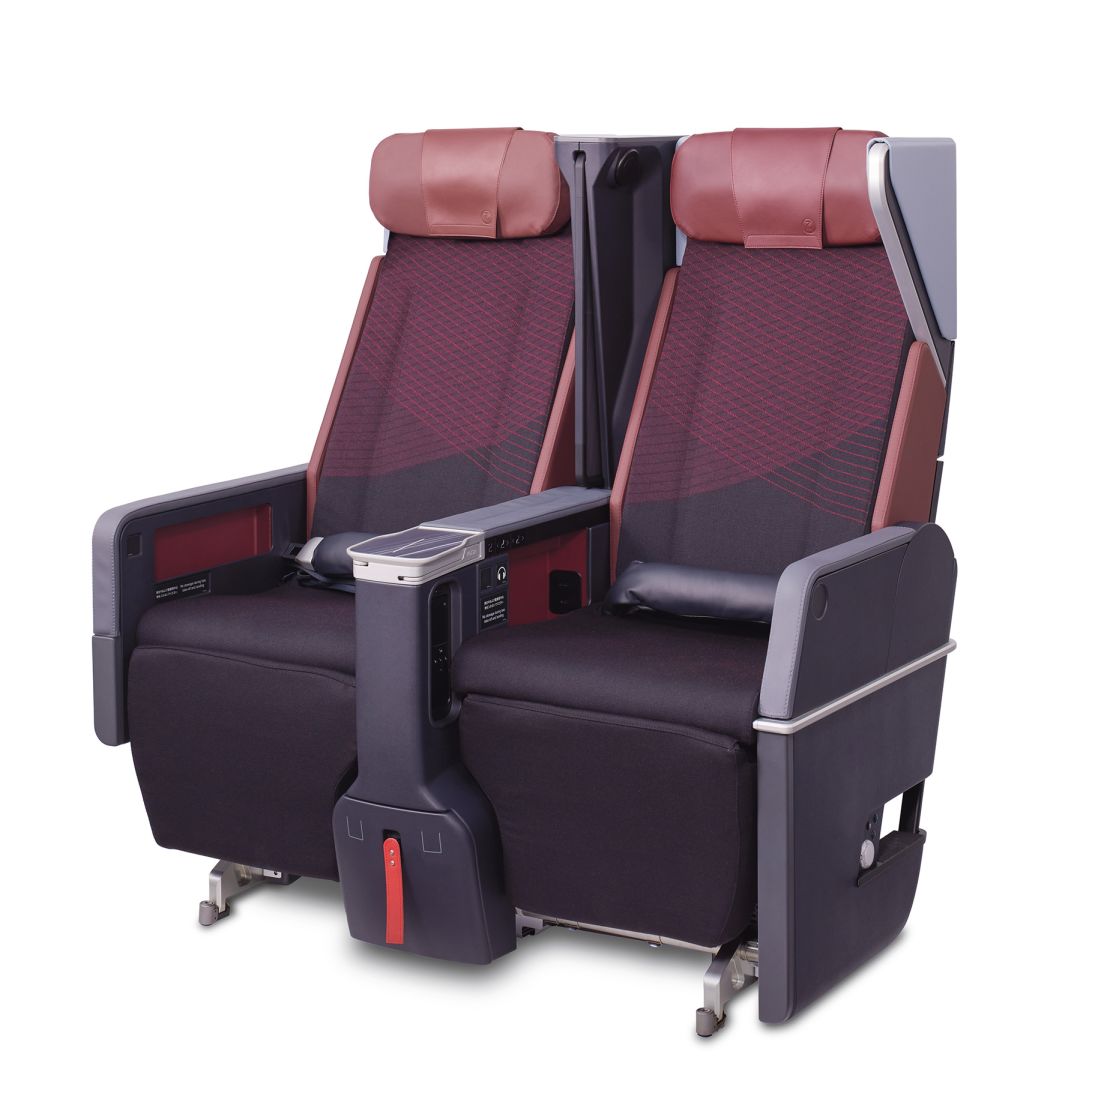 The new JAL premium economy seats have privacy partitions and electronic leg rests.